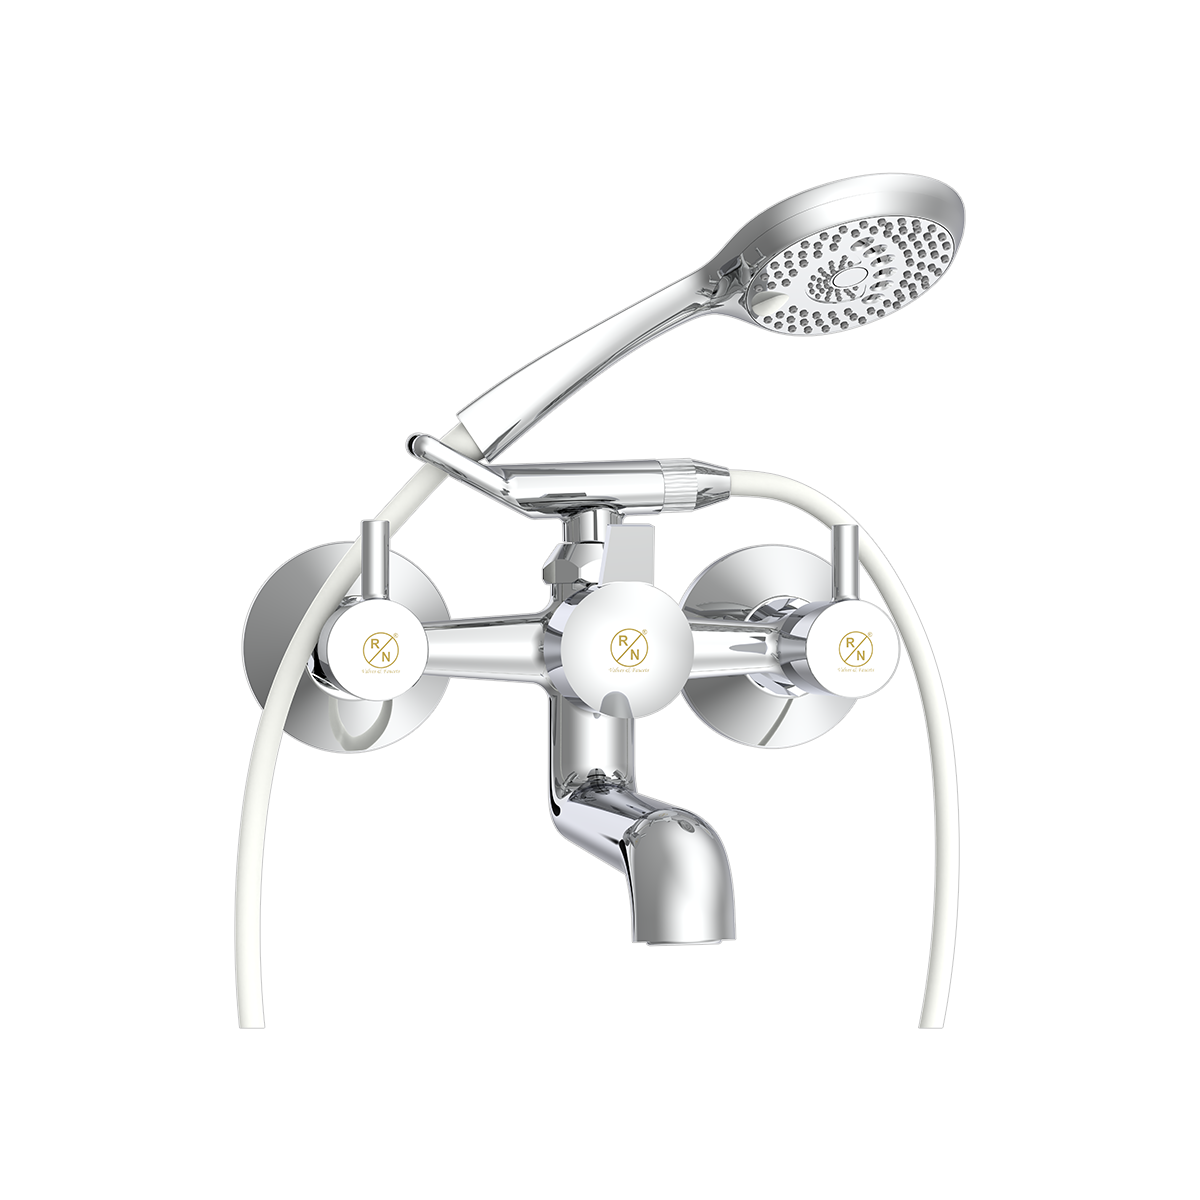 Wall Mixer With Provision Of Hand Shower With Crutch